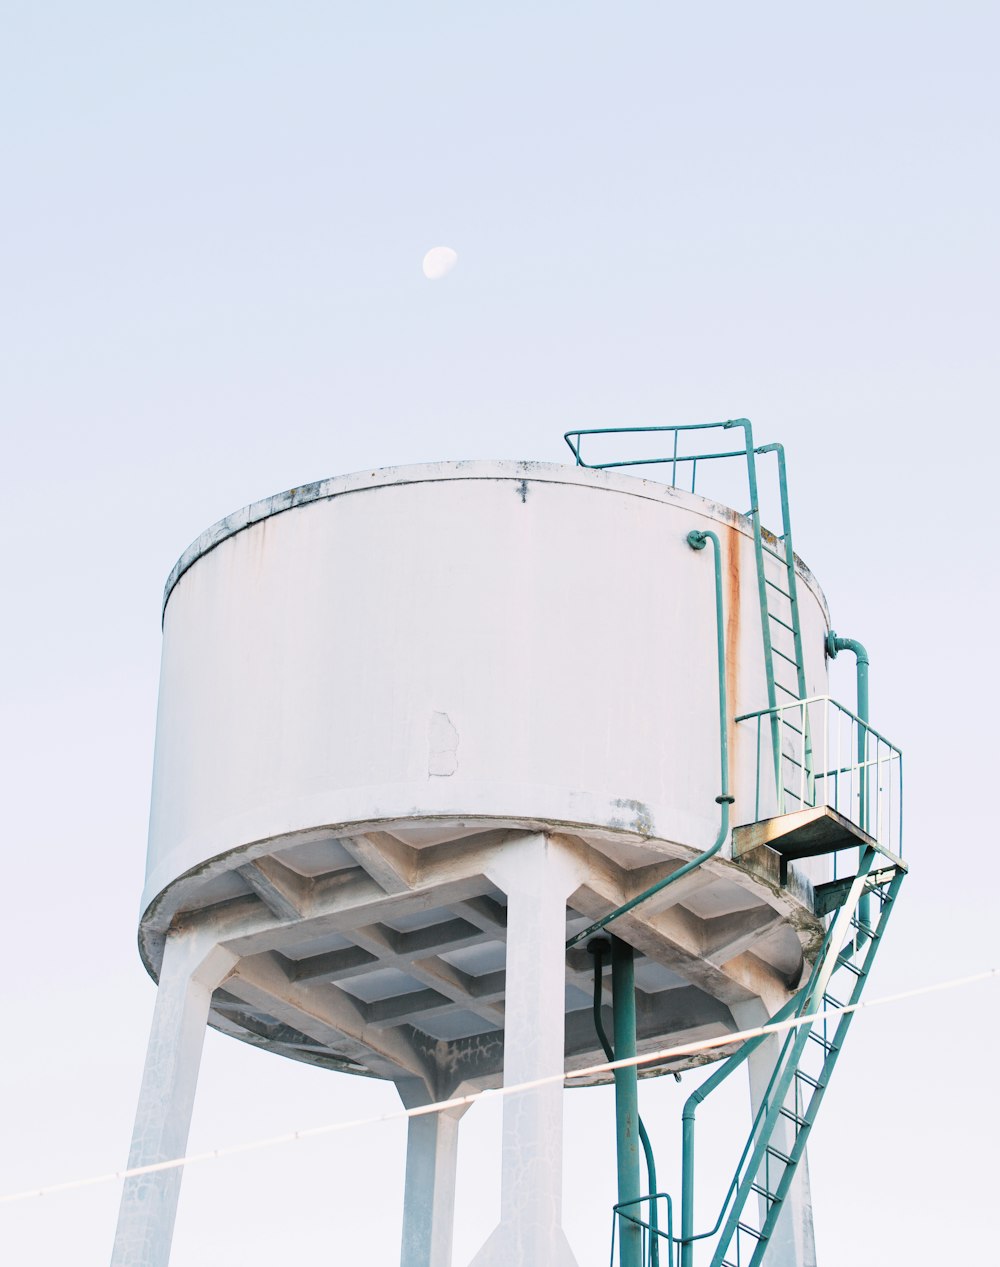 large round white concrete fluid tank with green metal ladder